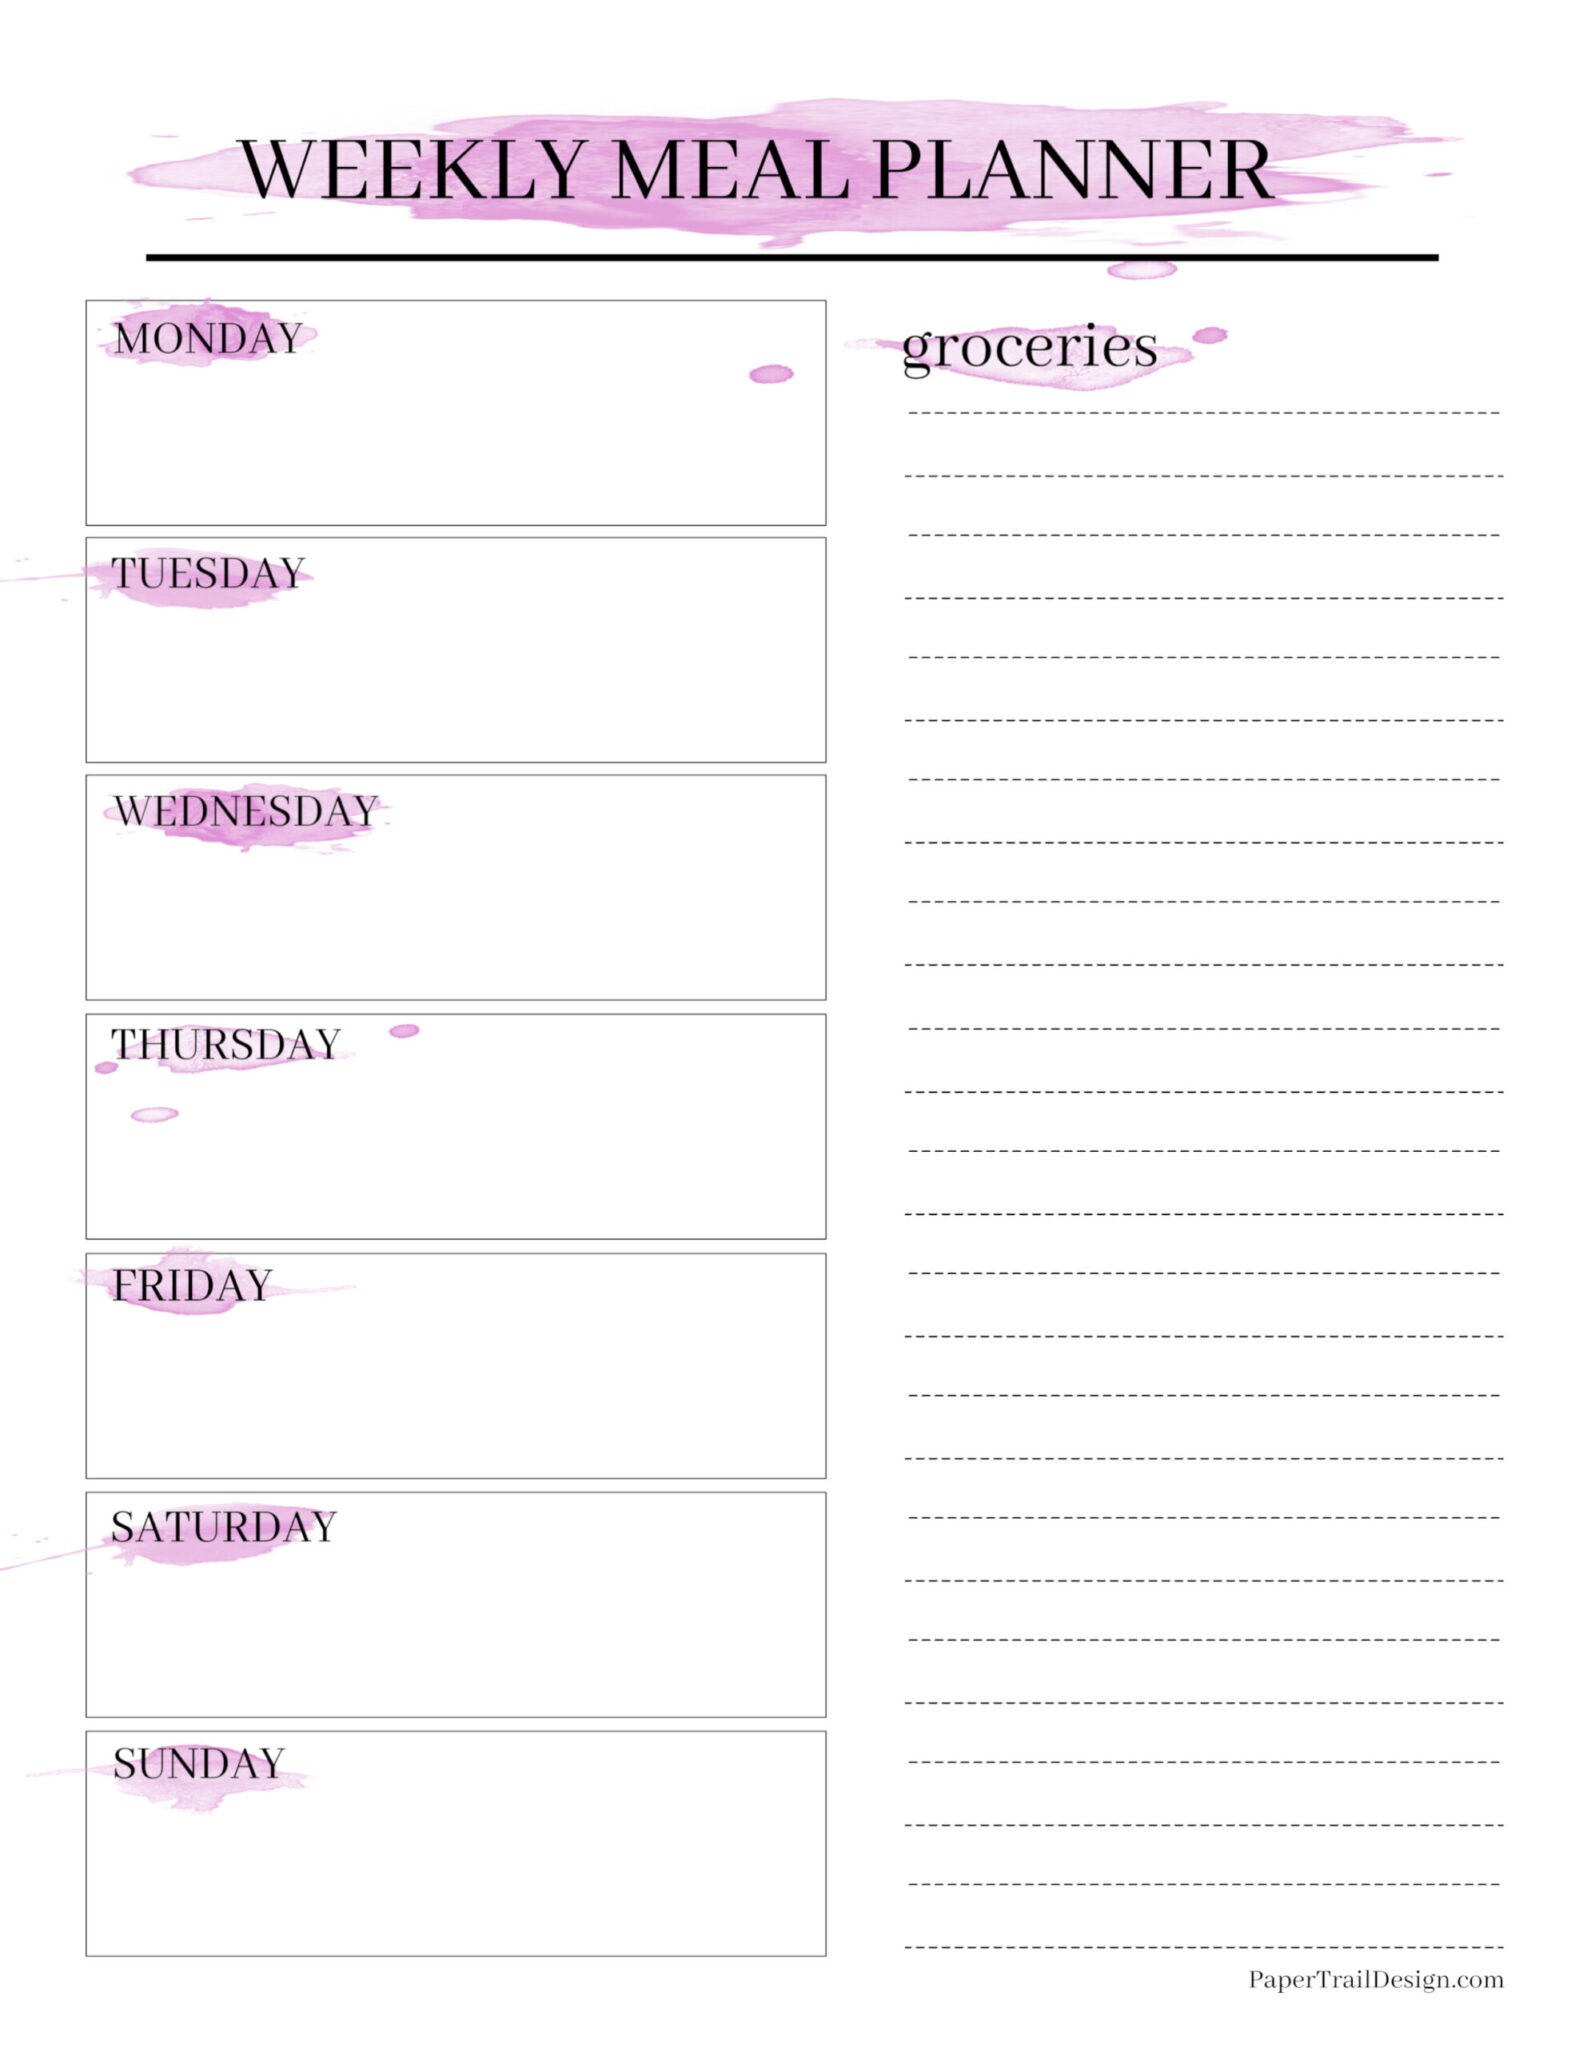 Watercolor Weekly Meal Planner with Grocery List - Paper Trail Design